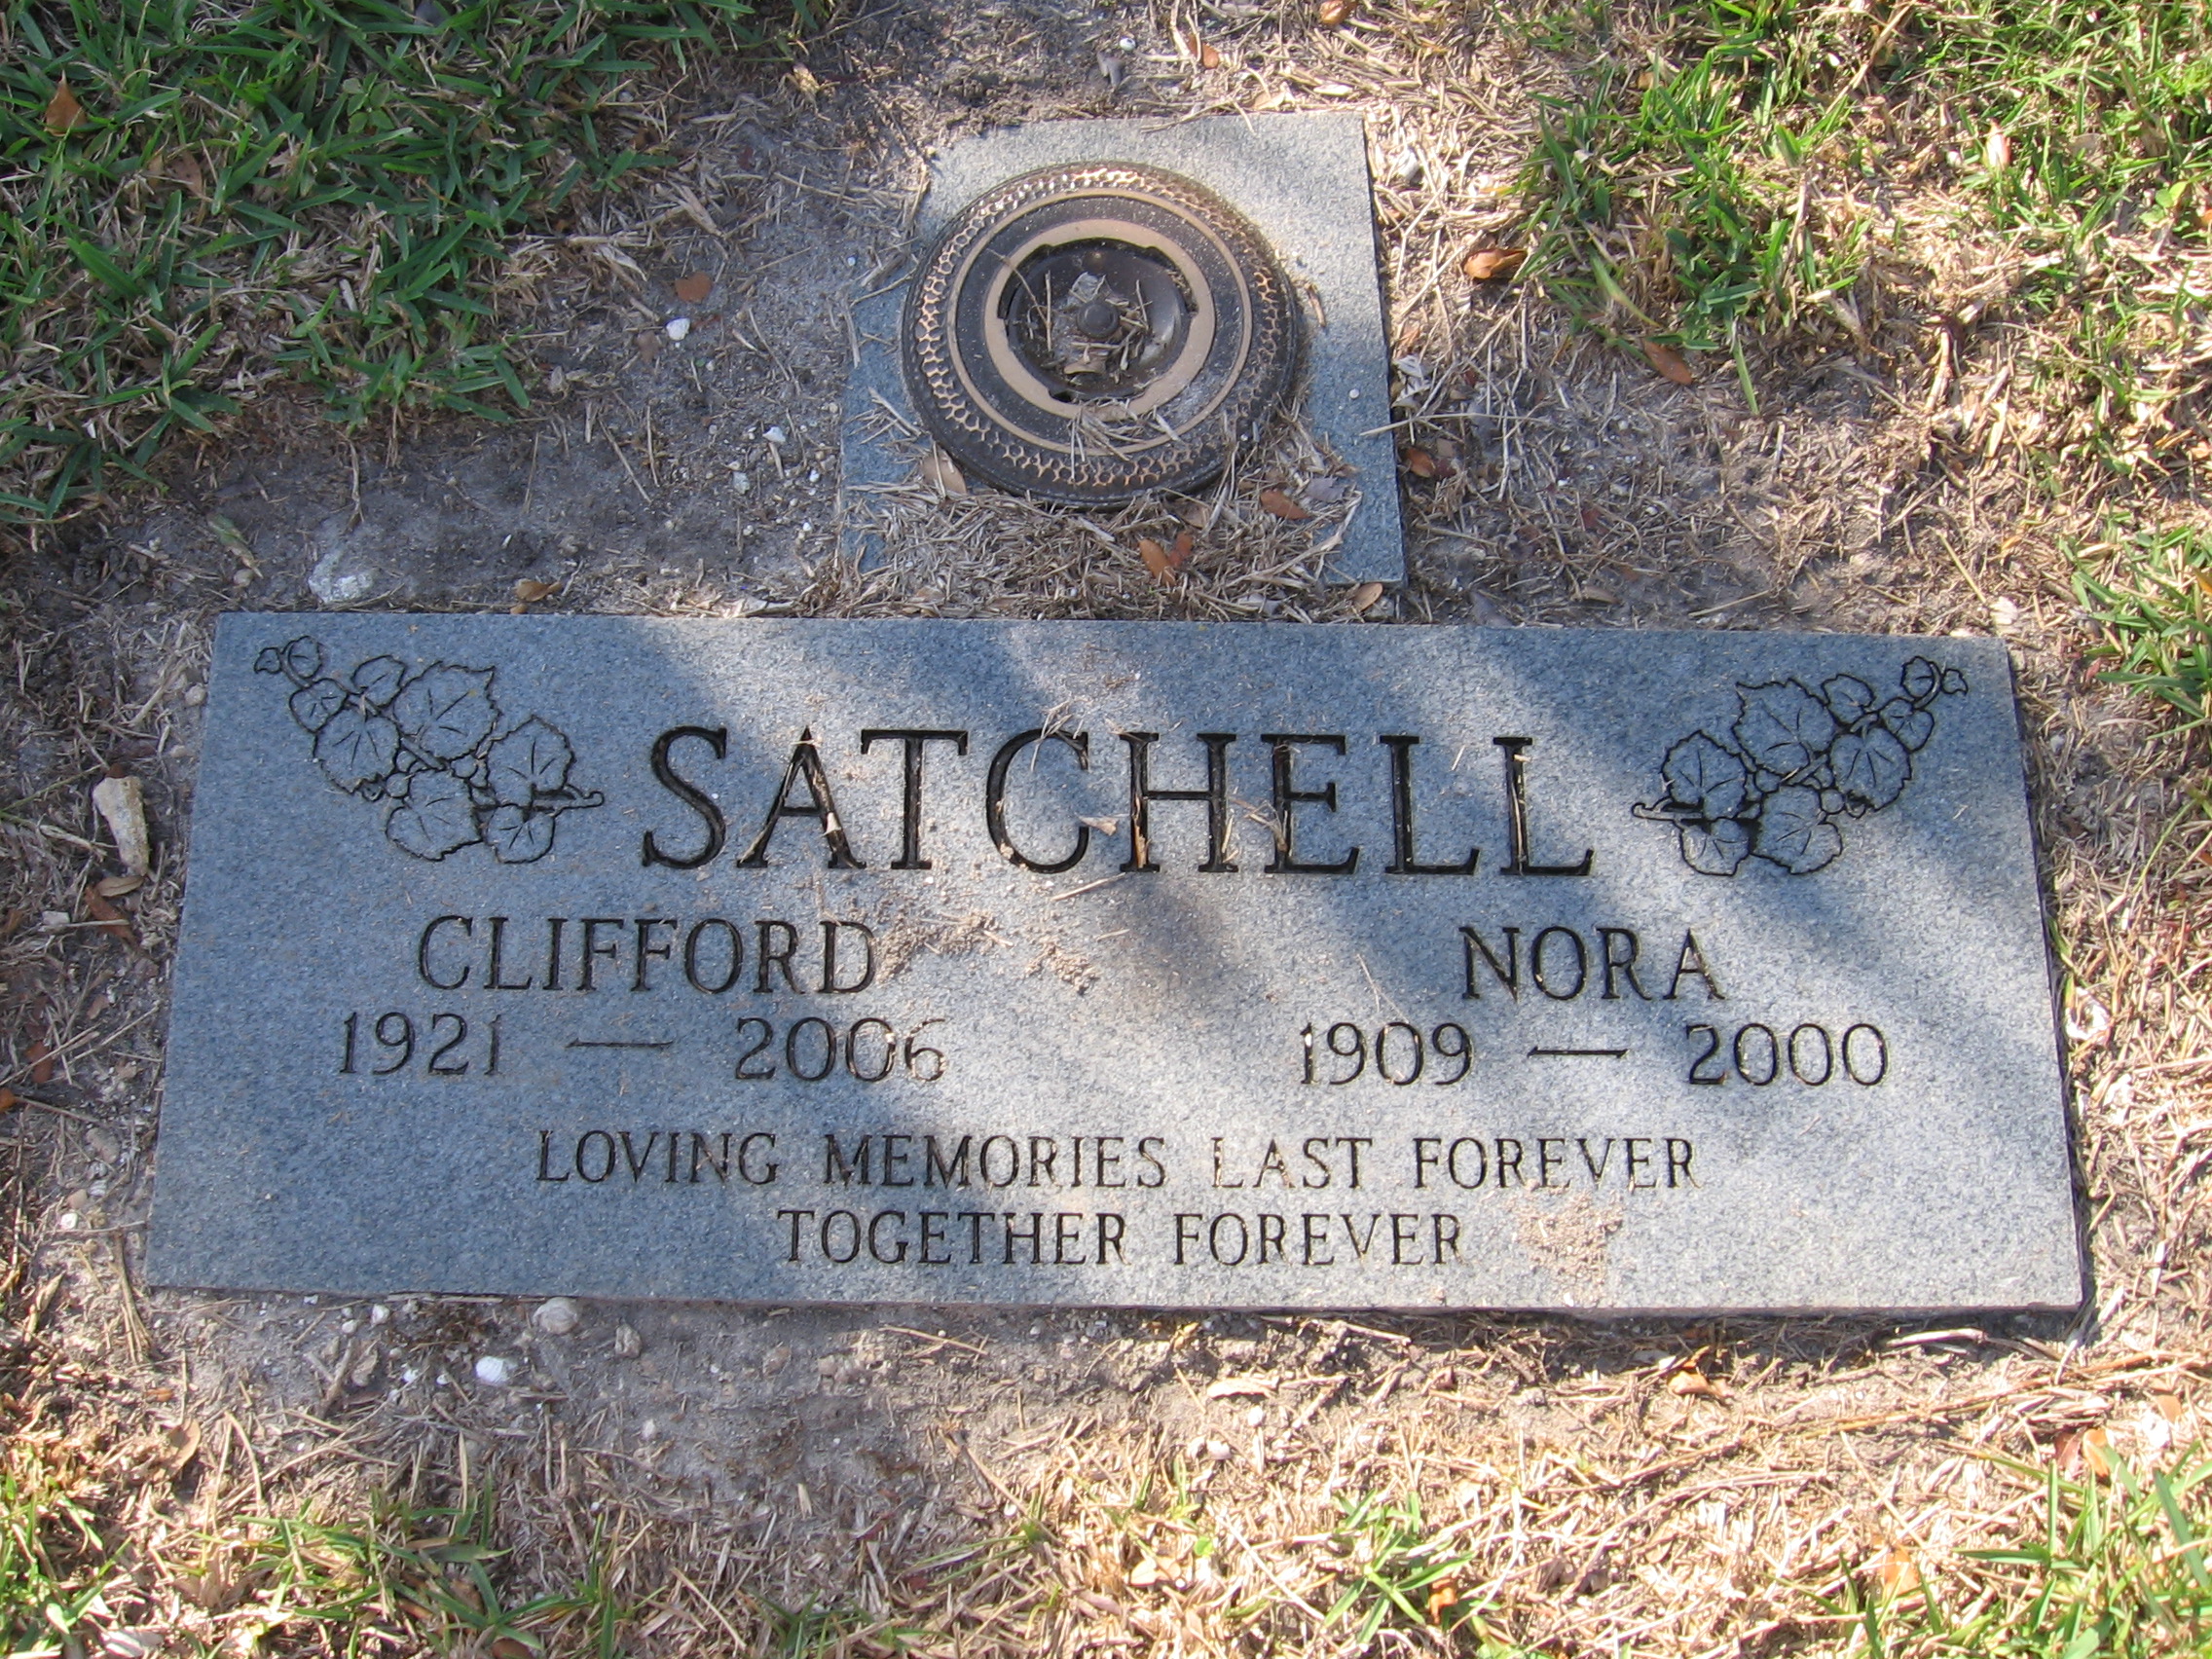 Clifford Satchell